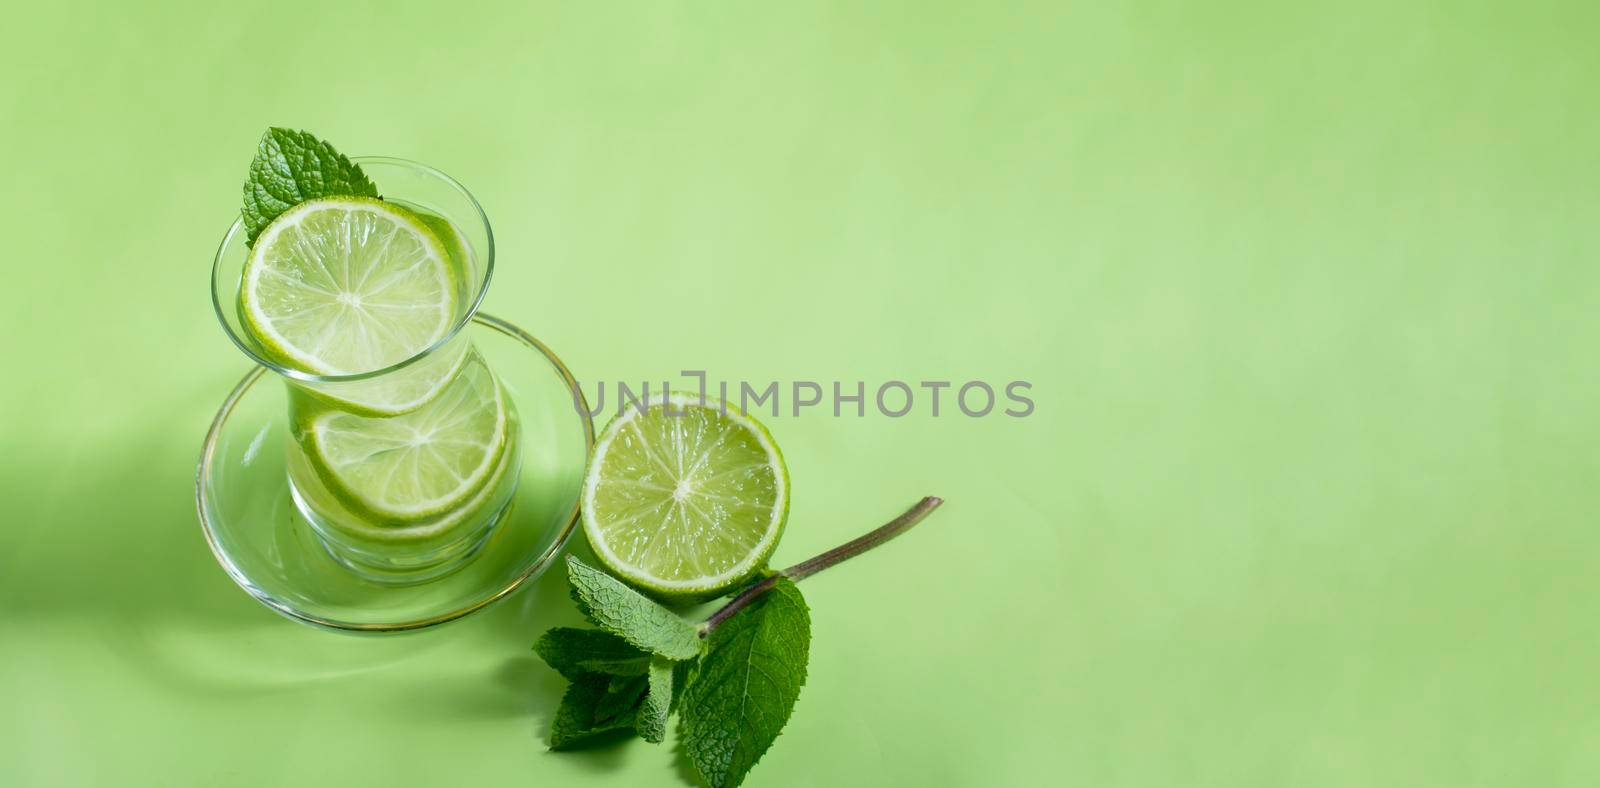 tea with mint and lime, with a calming effect, green still life close-up on a green background, top view. mojito, health drink, alternative medicine.High Quality Photo